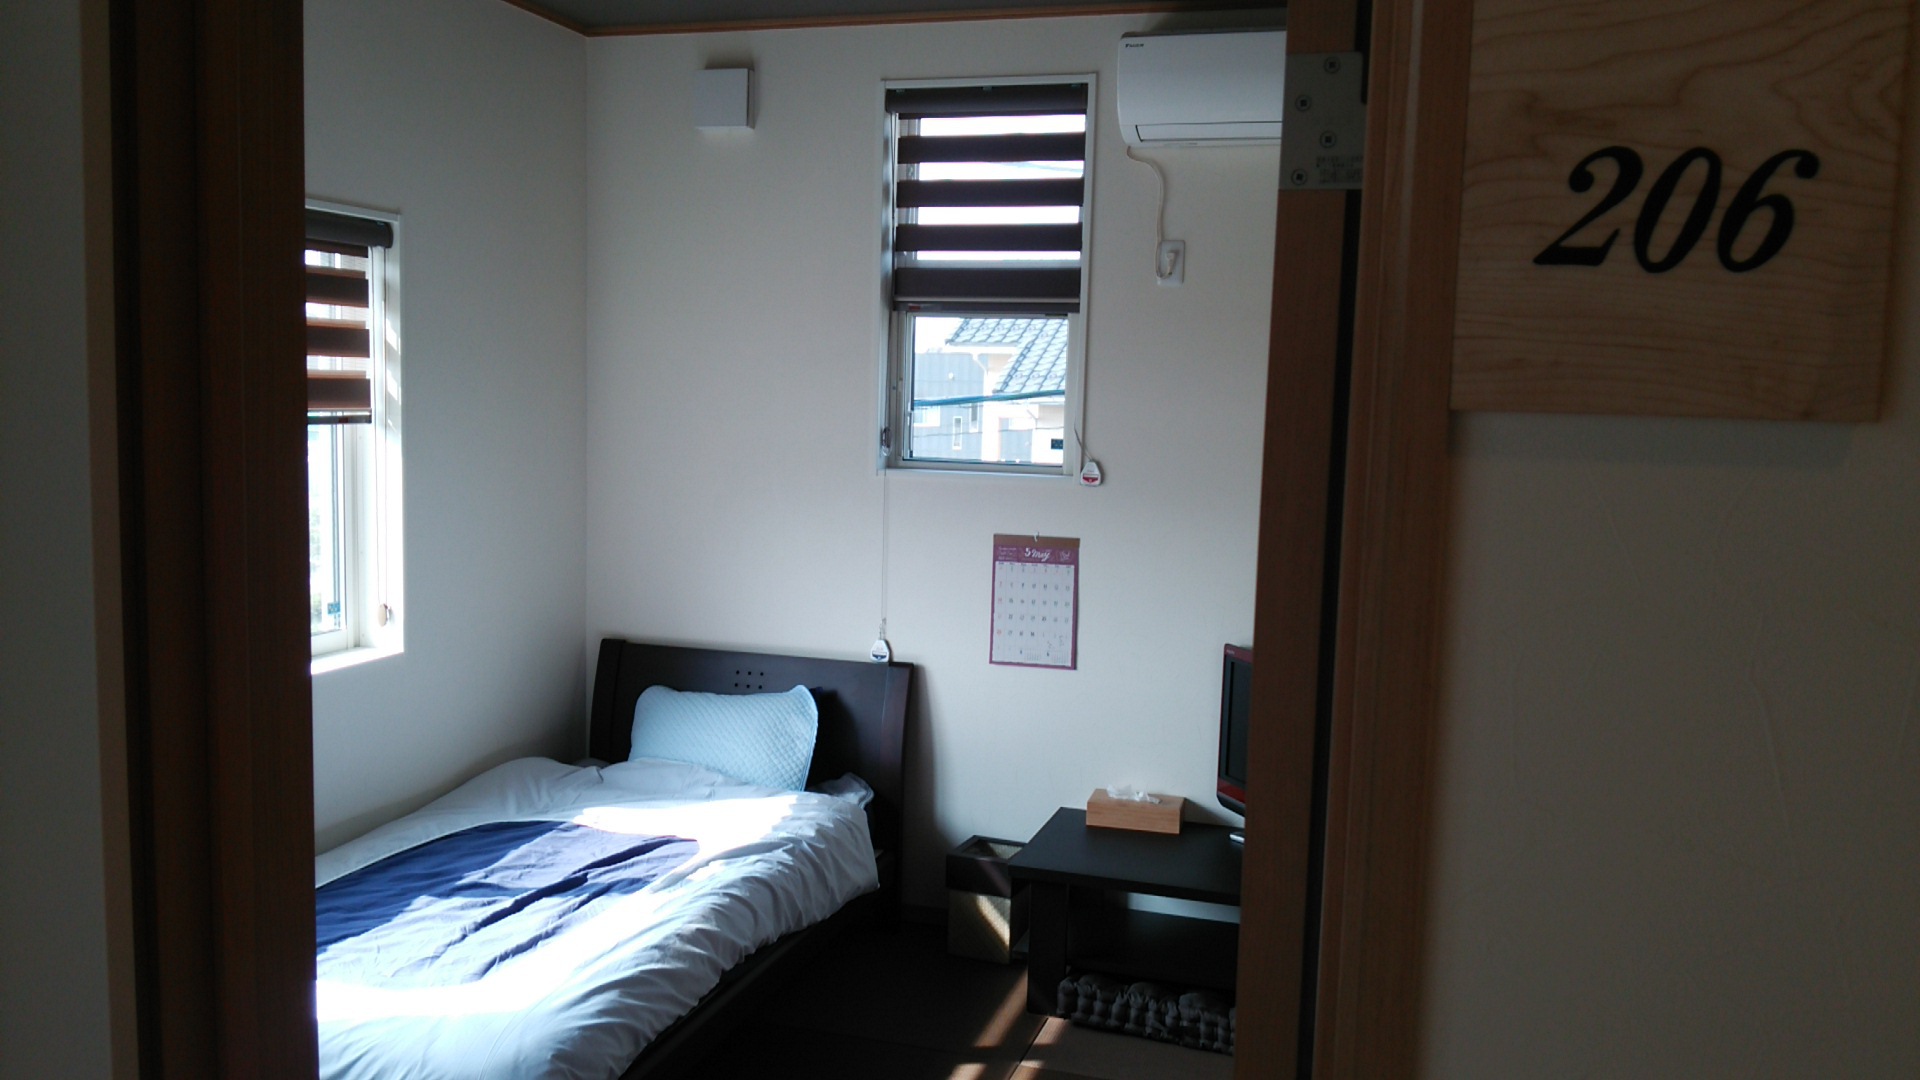 Sports Oen Gasshukujo One Day Fam Ideally located in the Nanao area, Sports Oen Gasshukujo One Day Fam promises a relaxing and wonderful visit. The property offers guests a range of services and amenities designed to provide comfort a